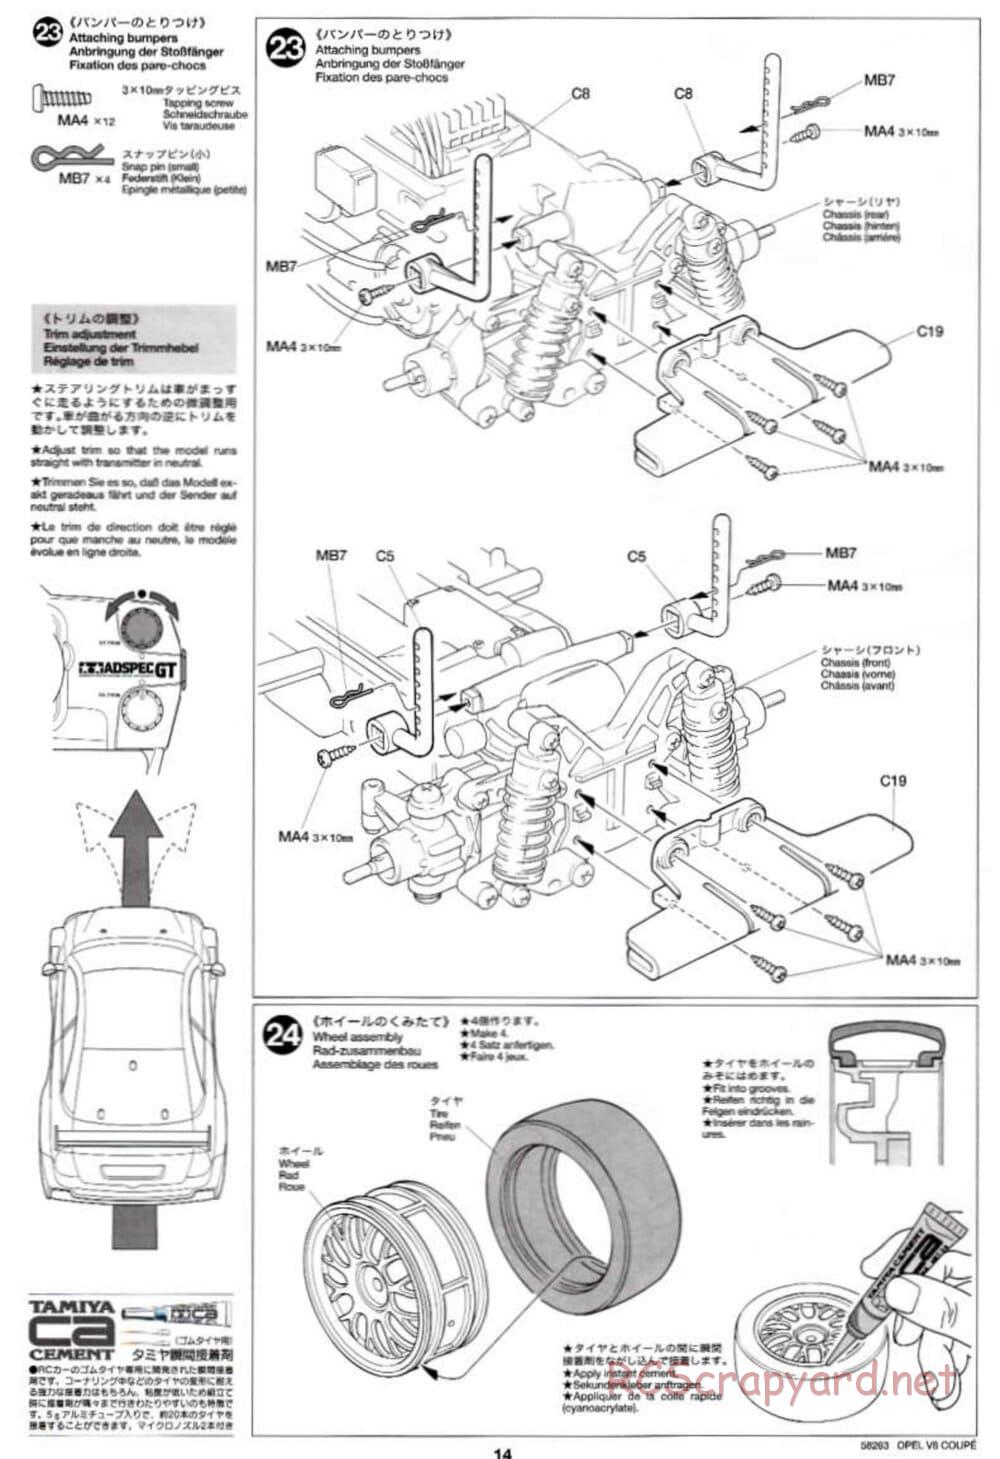 Tamiya - Opel V8 Coupe - TL-01 Chassis - Manual - Page 14